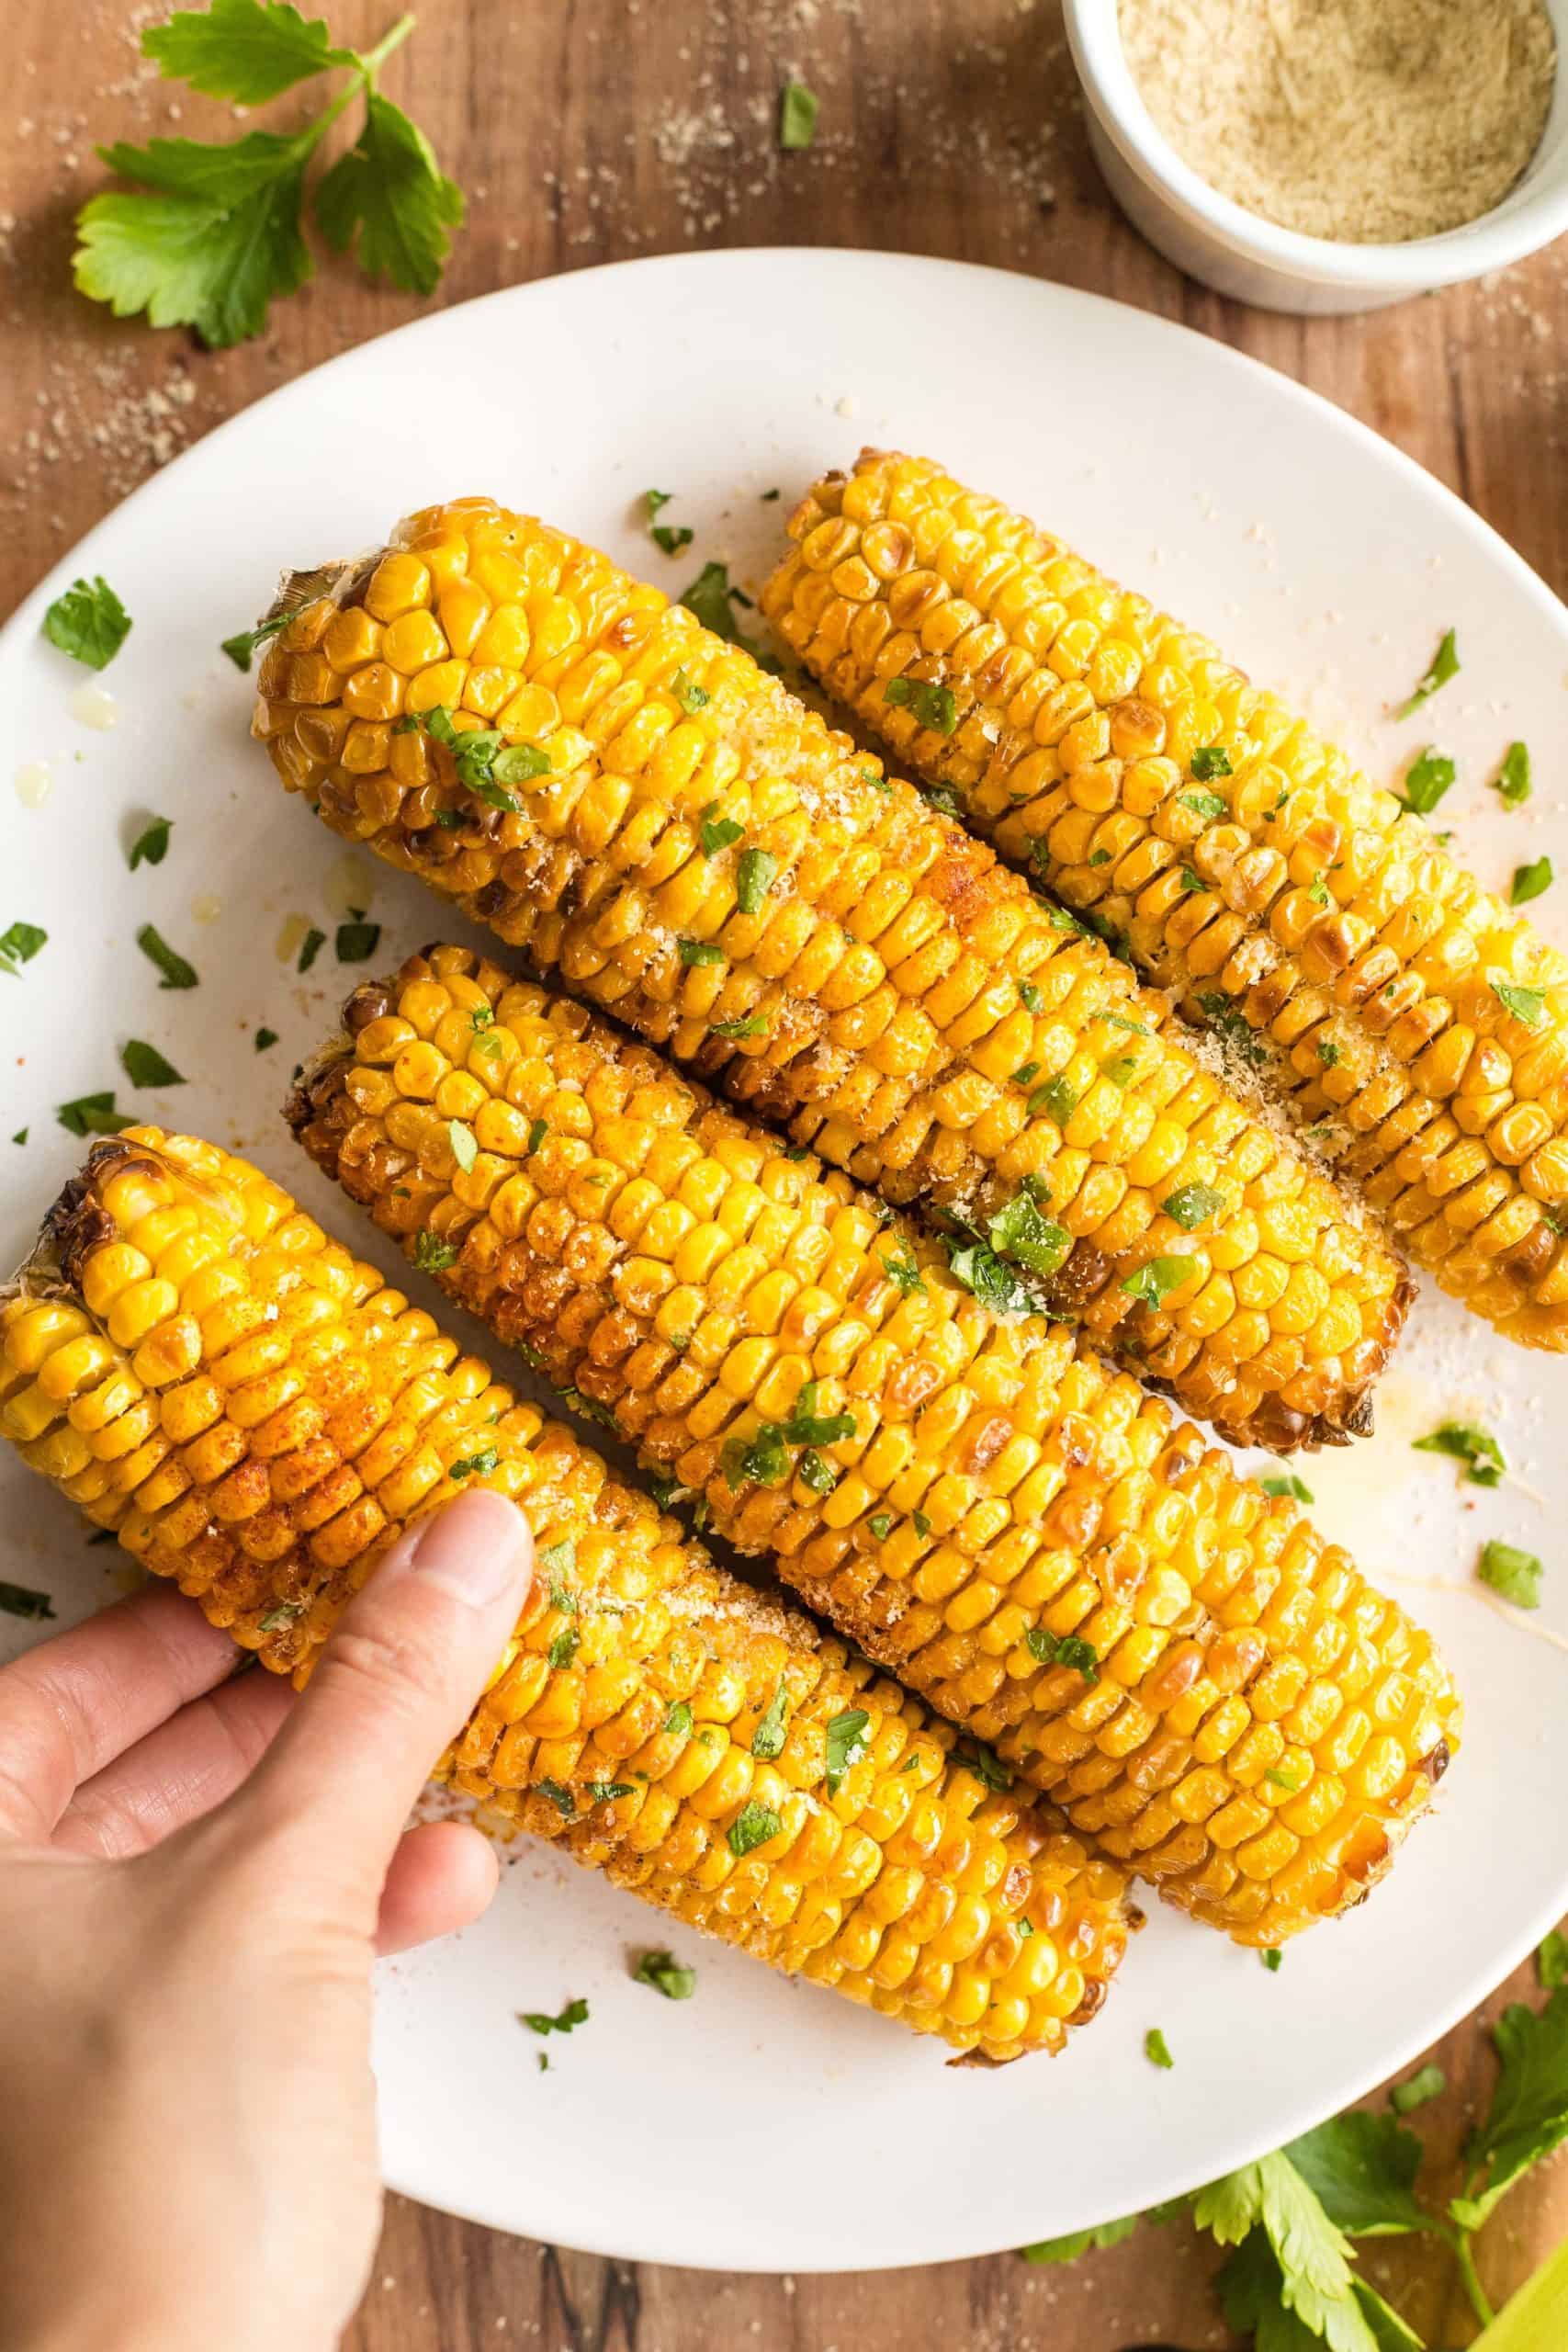 Hand holding a freshly air fried corn on the cob.